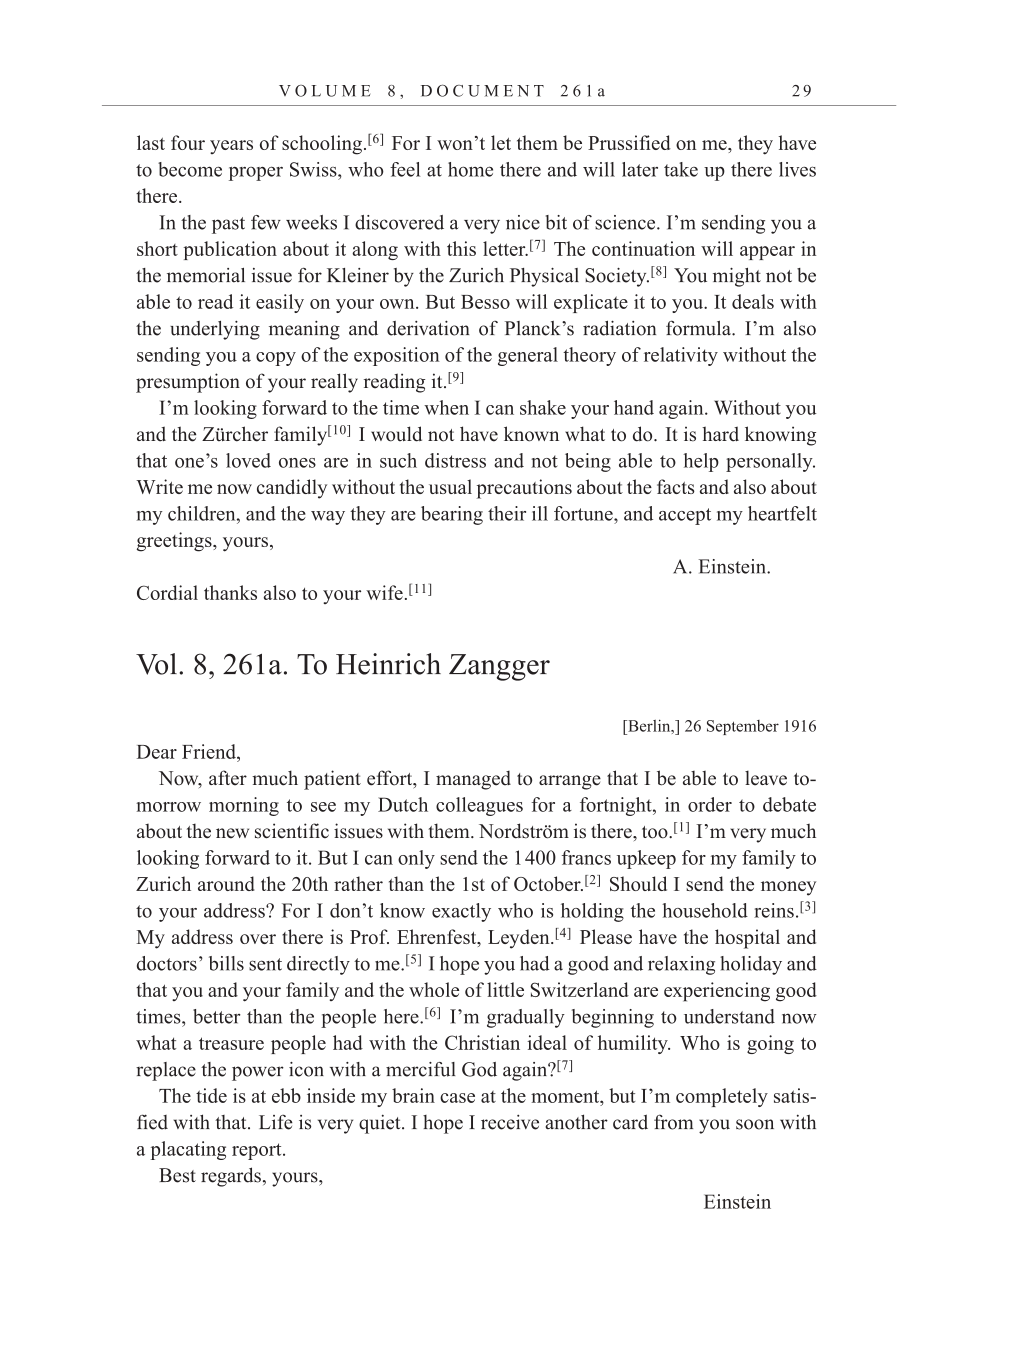 Volume 10: The Berlin Years: Correspondence, May-December 1920, and Supplementary Correspondence, 1909-1920 (English translation supplement) page 29